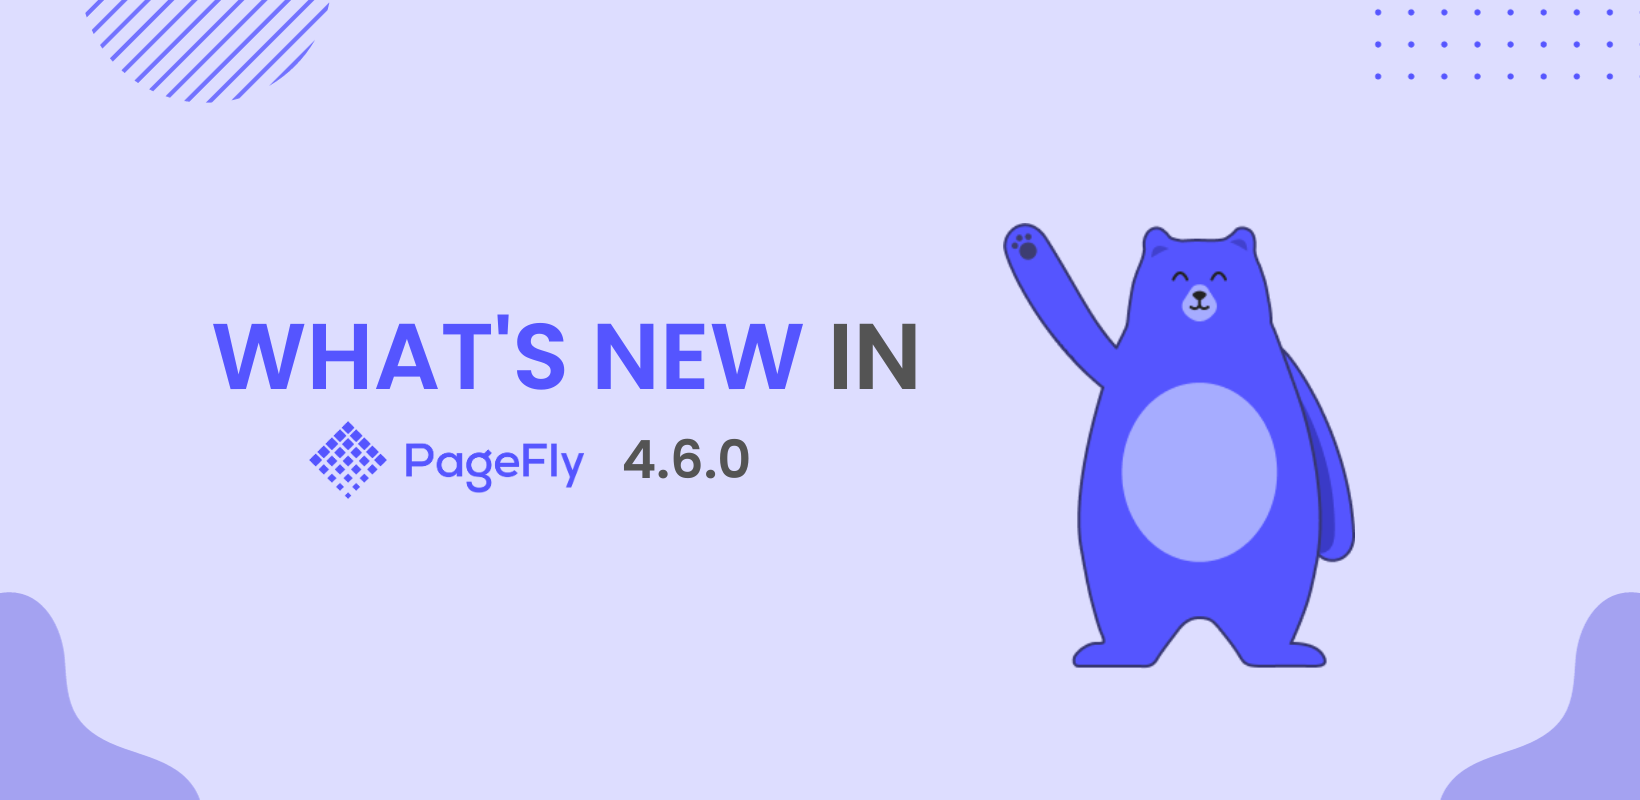 PageFly 4.6.0: Introducing PageFly Update with Polaris v12 App UI and UX Improvements